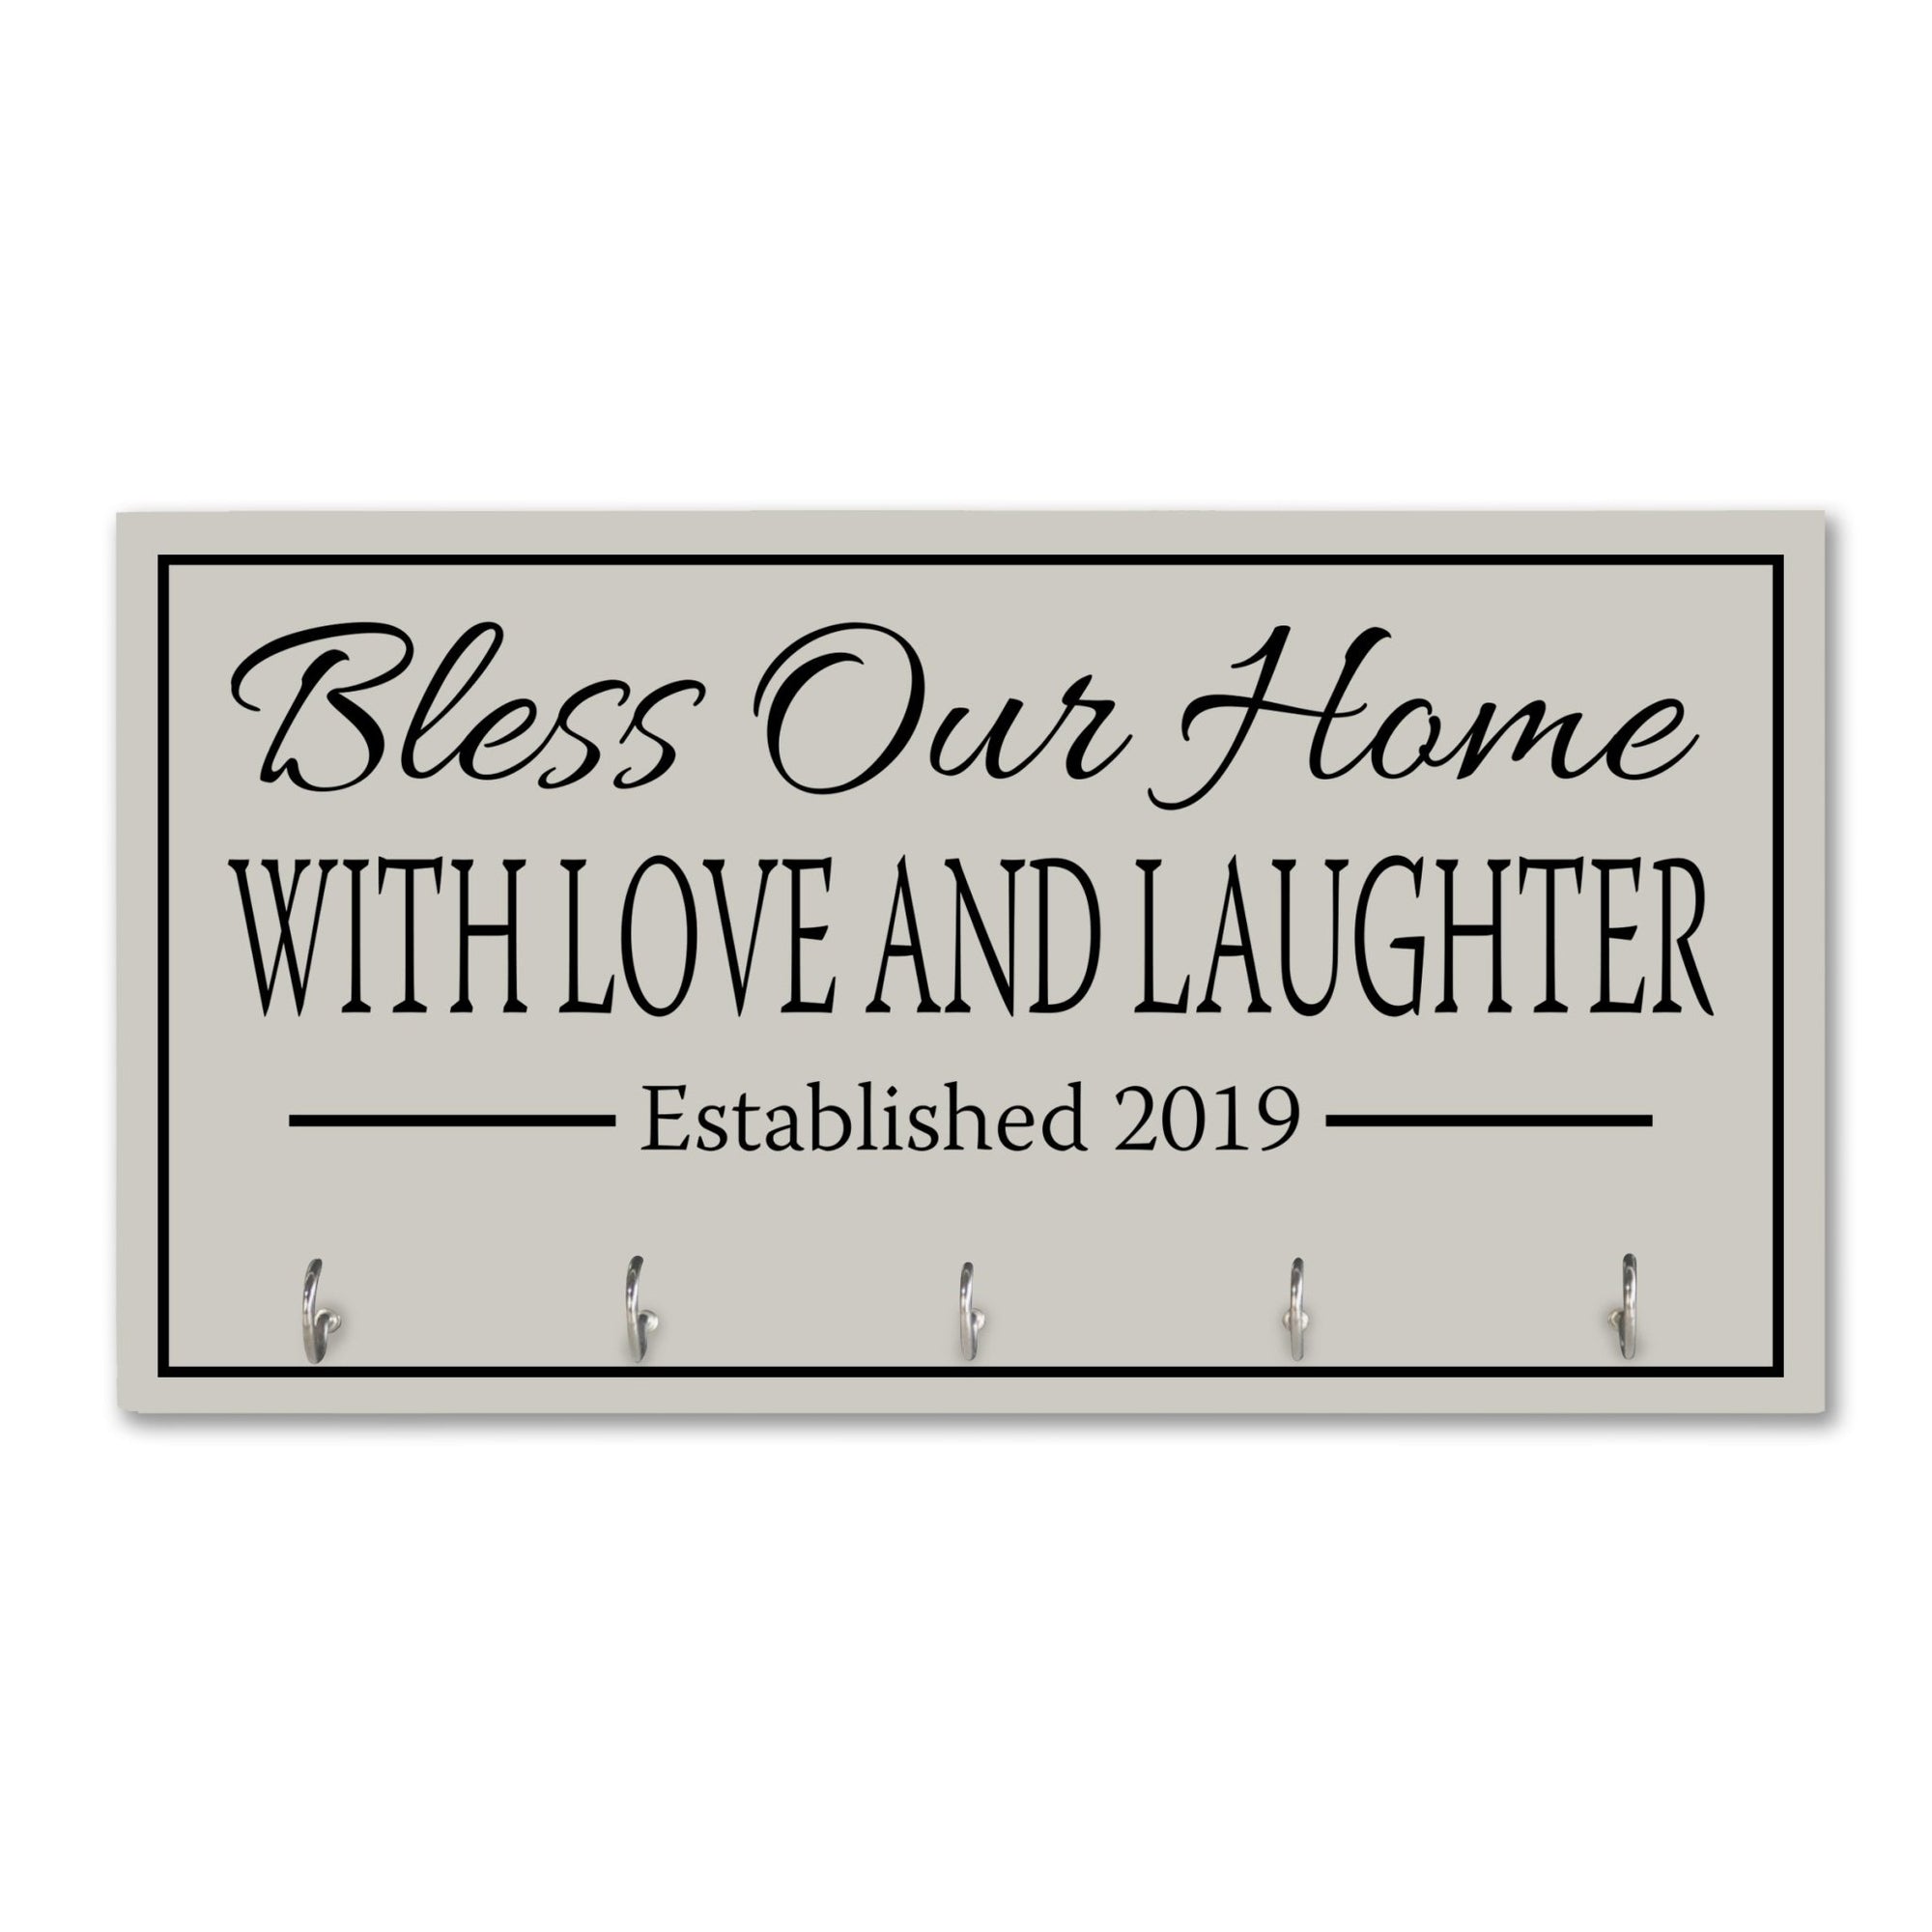 Personalized Established Key Holders - Bless Our Home - LifeSong Milestones